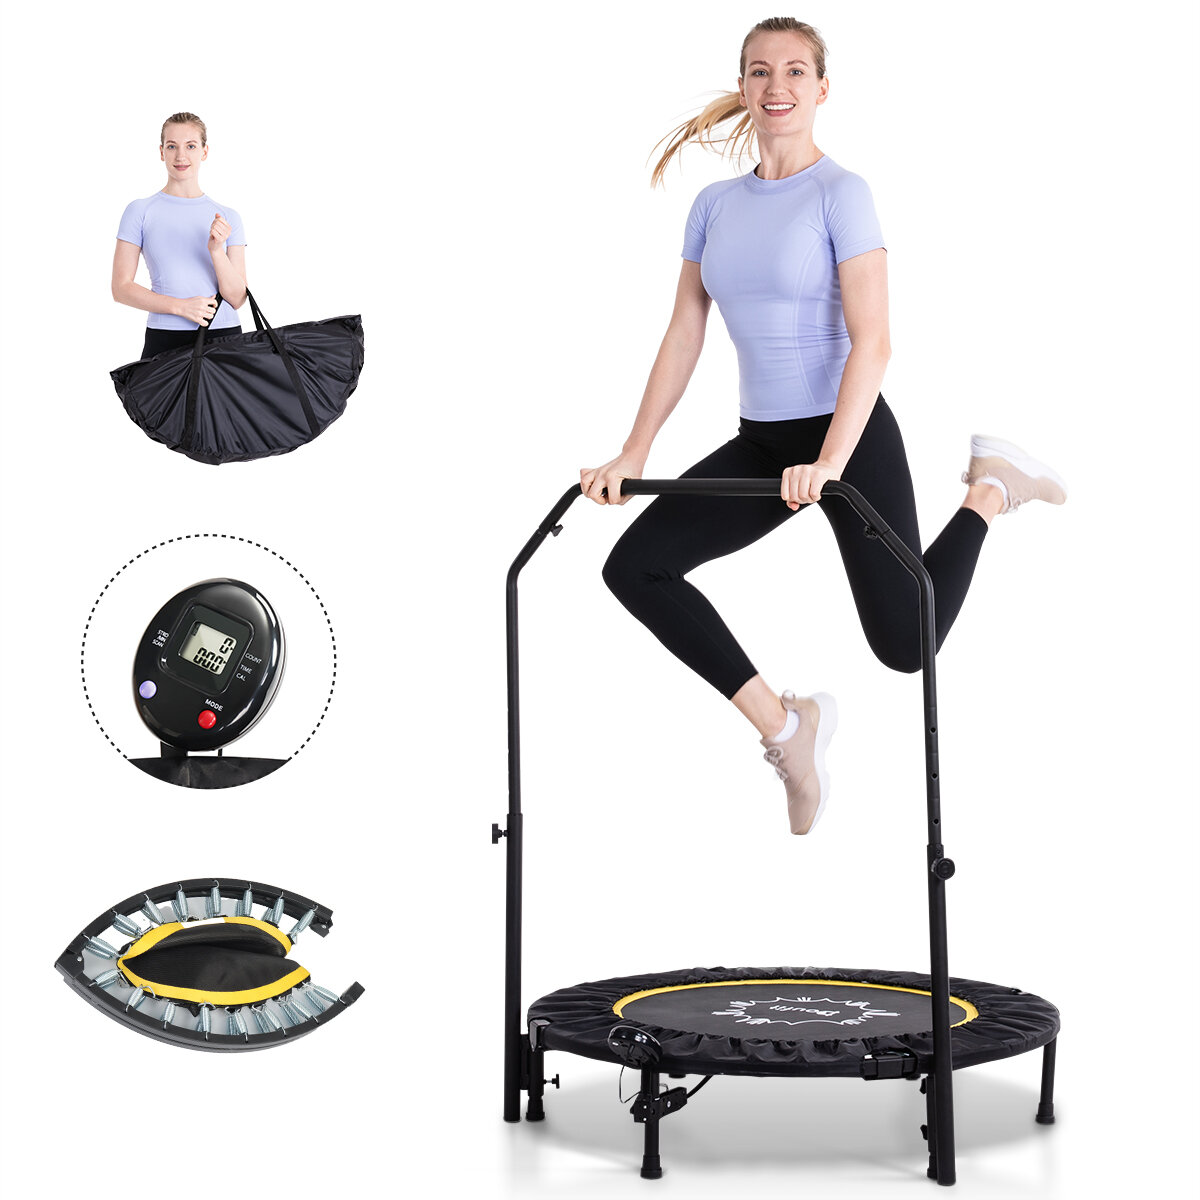 Image of Doufit TR-03 Foldable Trampoline for Adults Fitness 40" Max Load 330LBS Foldable with Adjustable Handle Safety Pads Exer